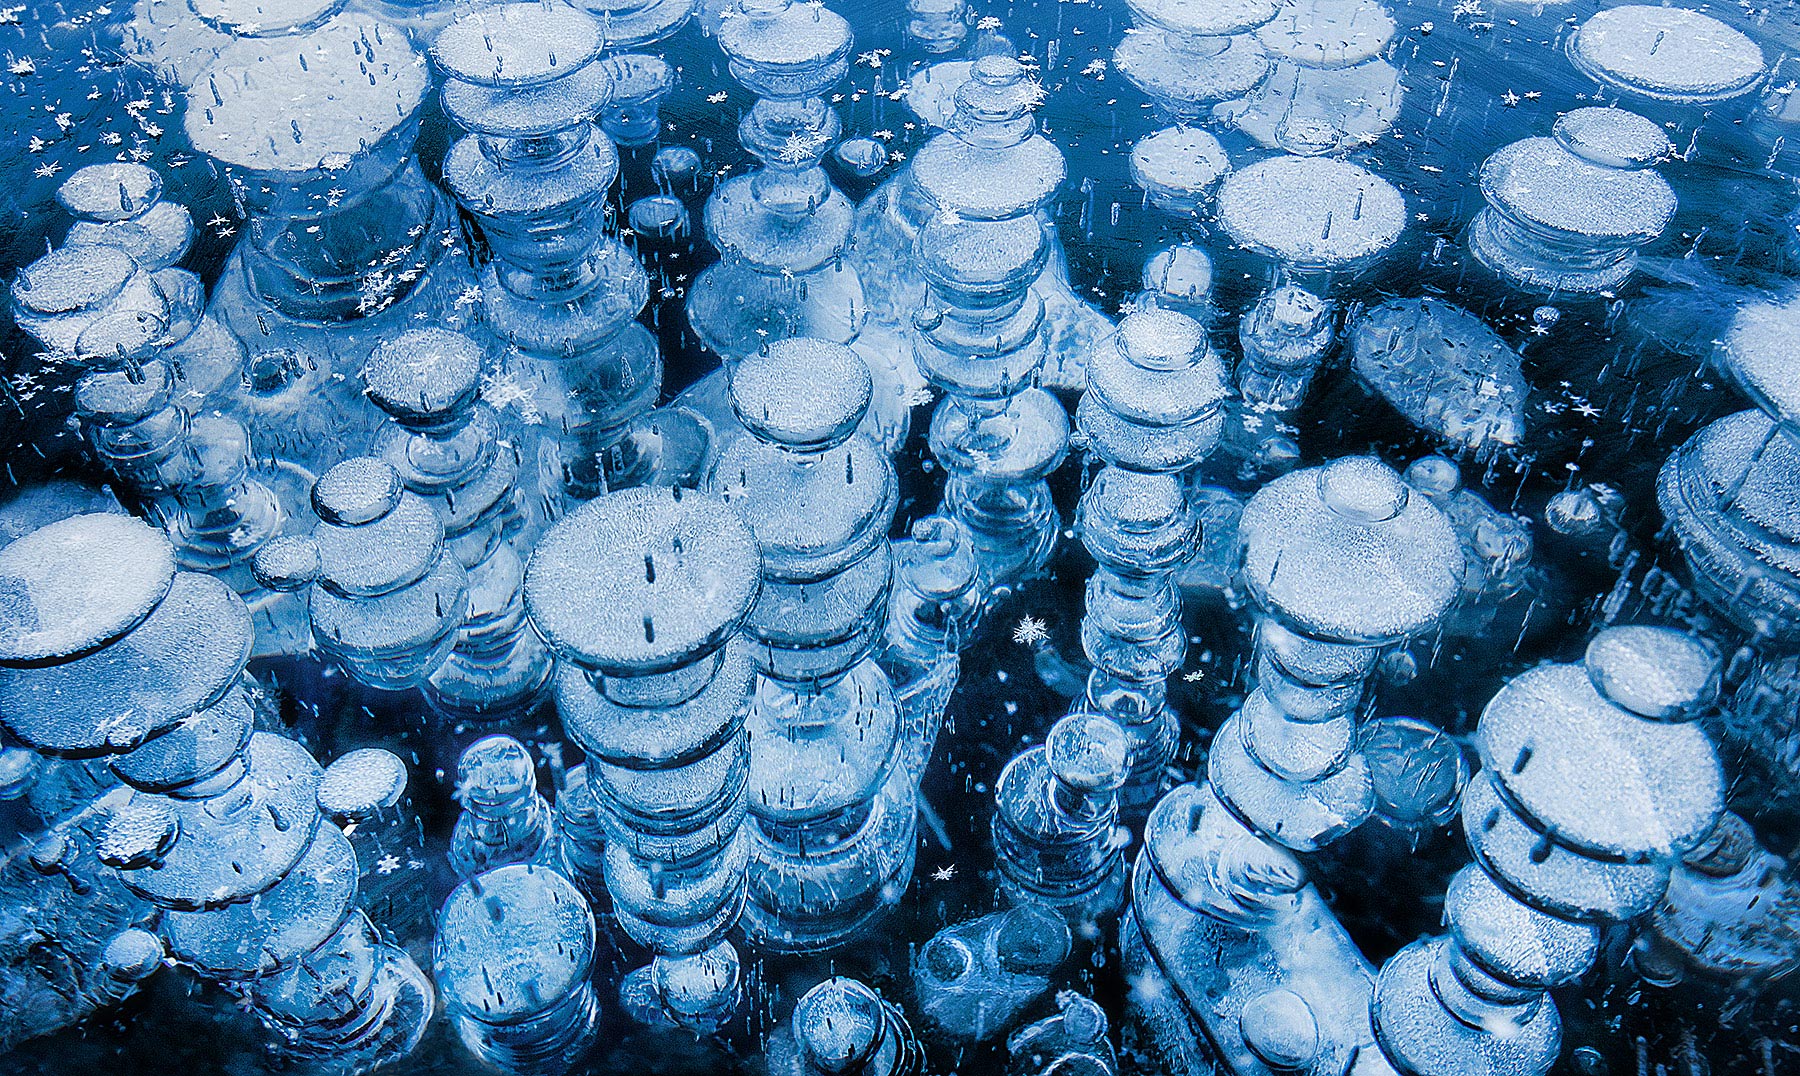 Methane bubbles up and freezes beneath the glassy ice and a few fresh snowflakes adorn the surface. &nbsp;